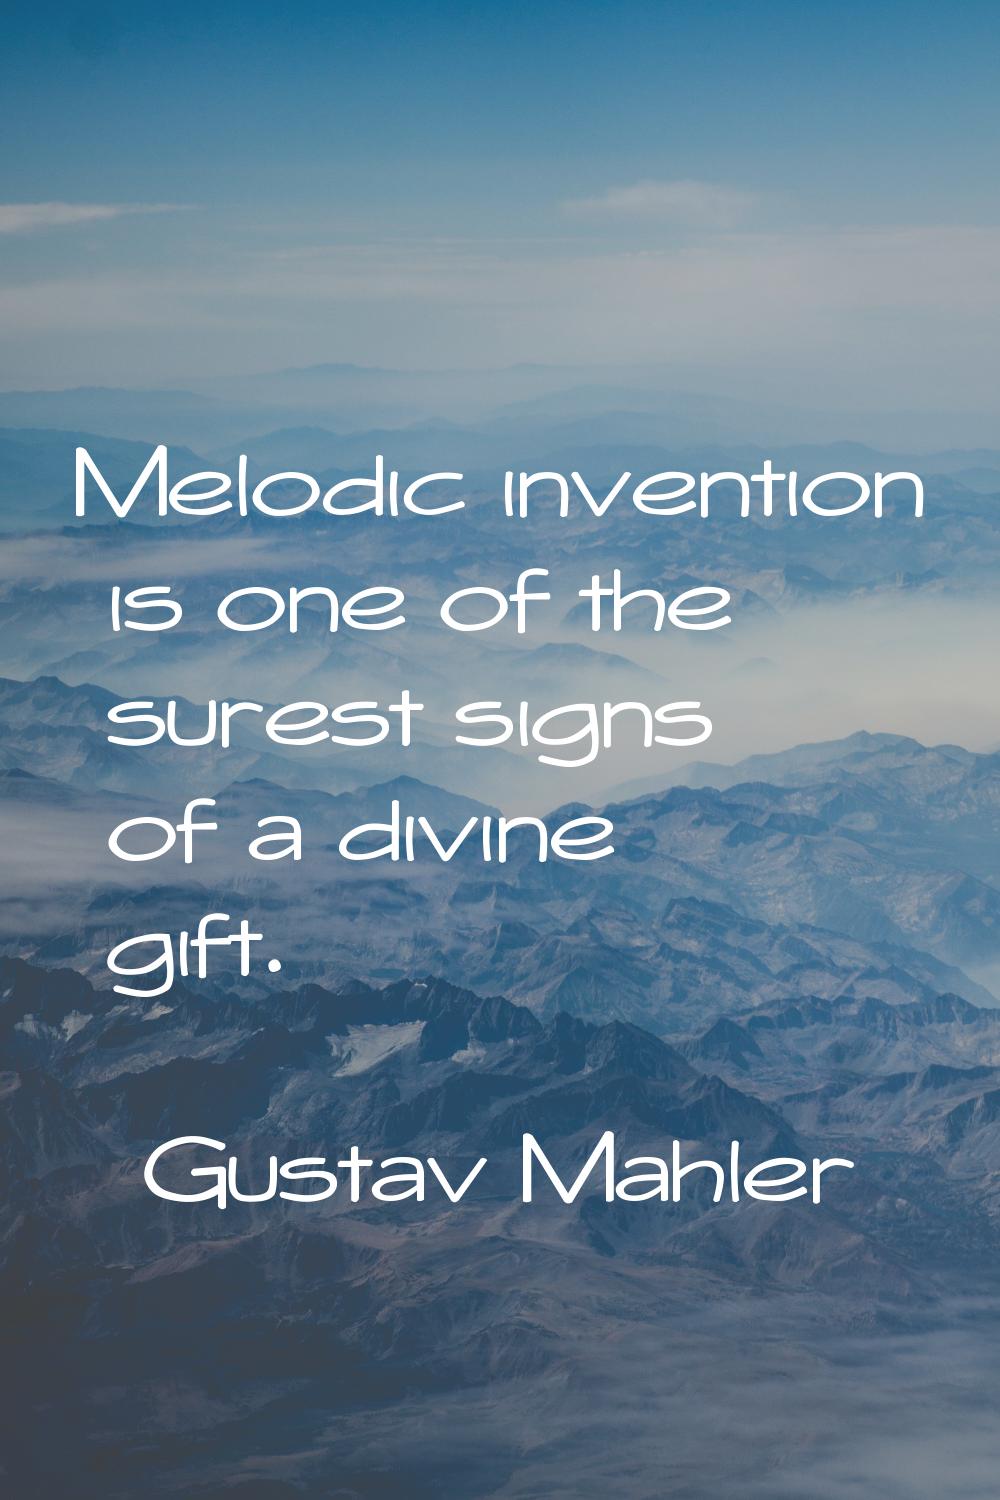 Melodic invention is one of the surest signs of a divine gift.